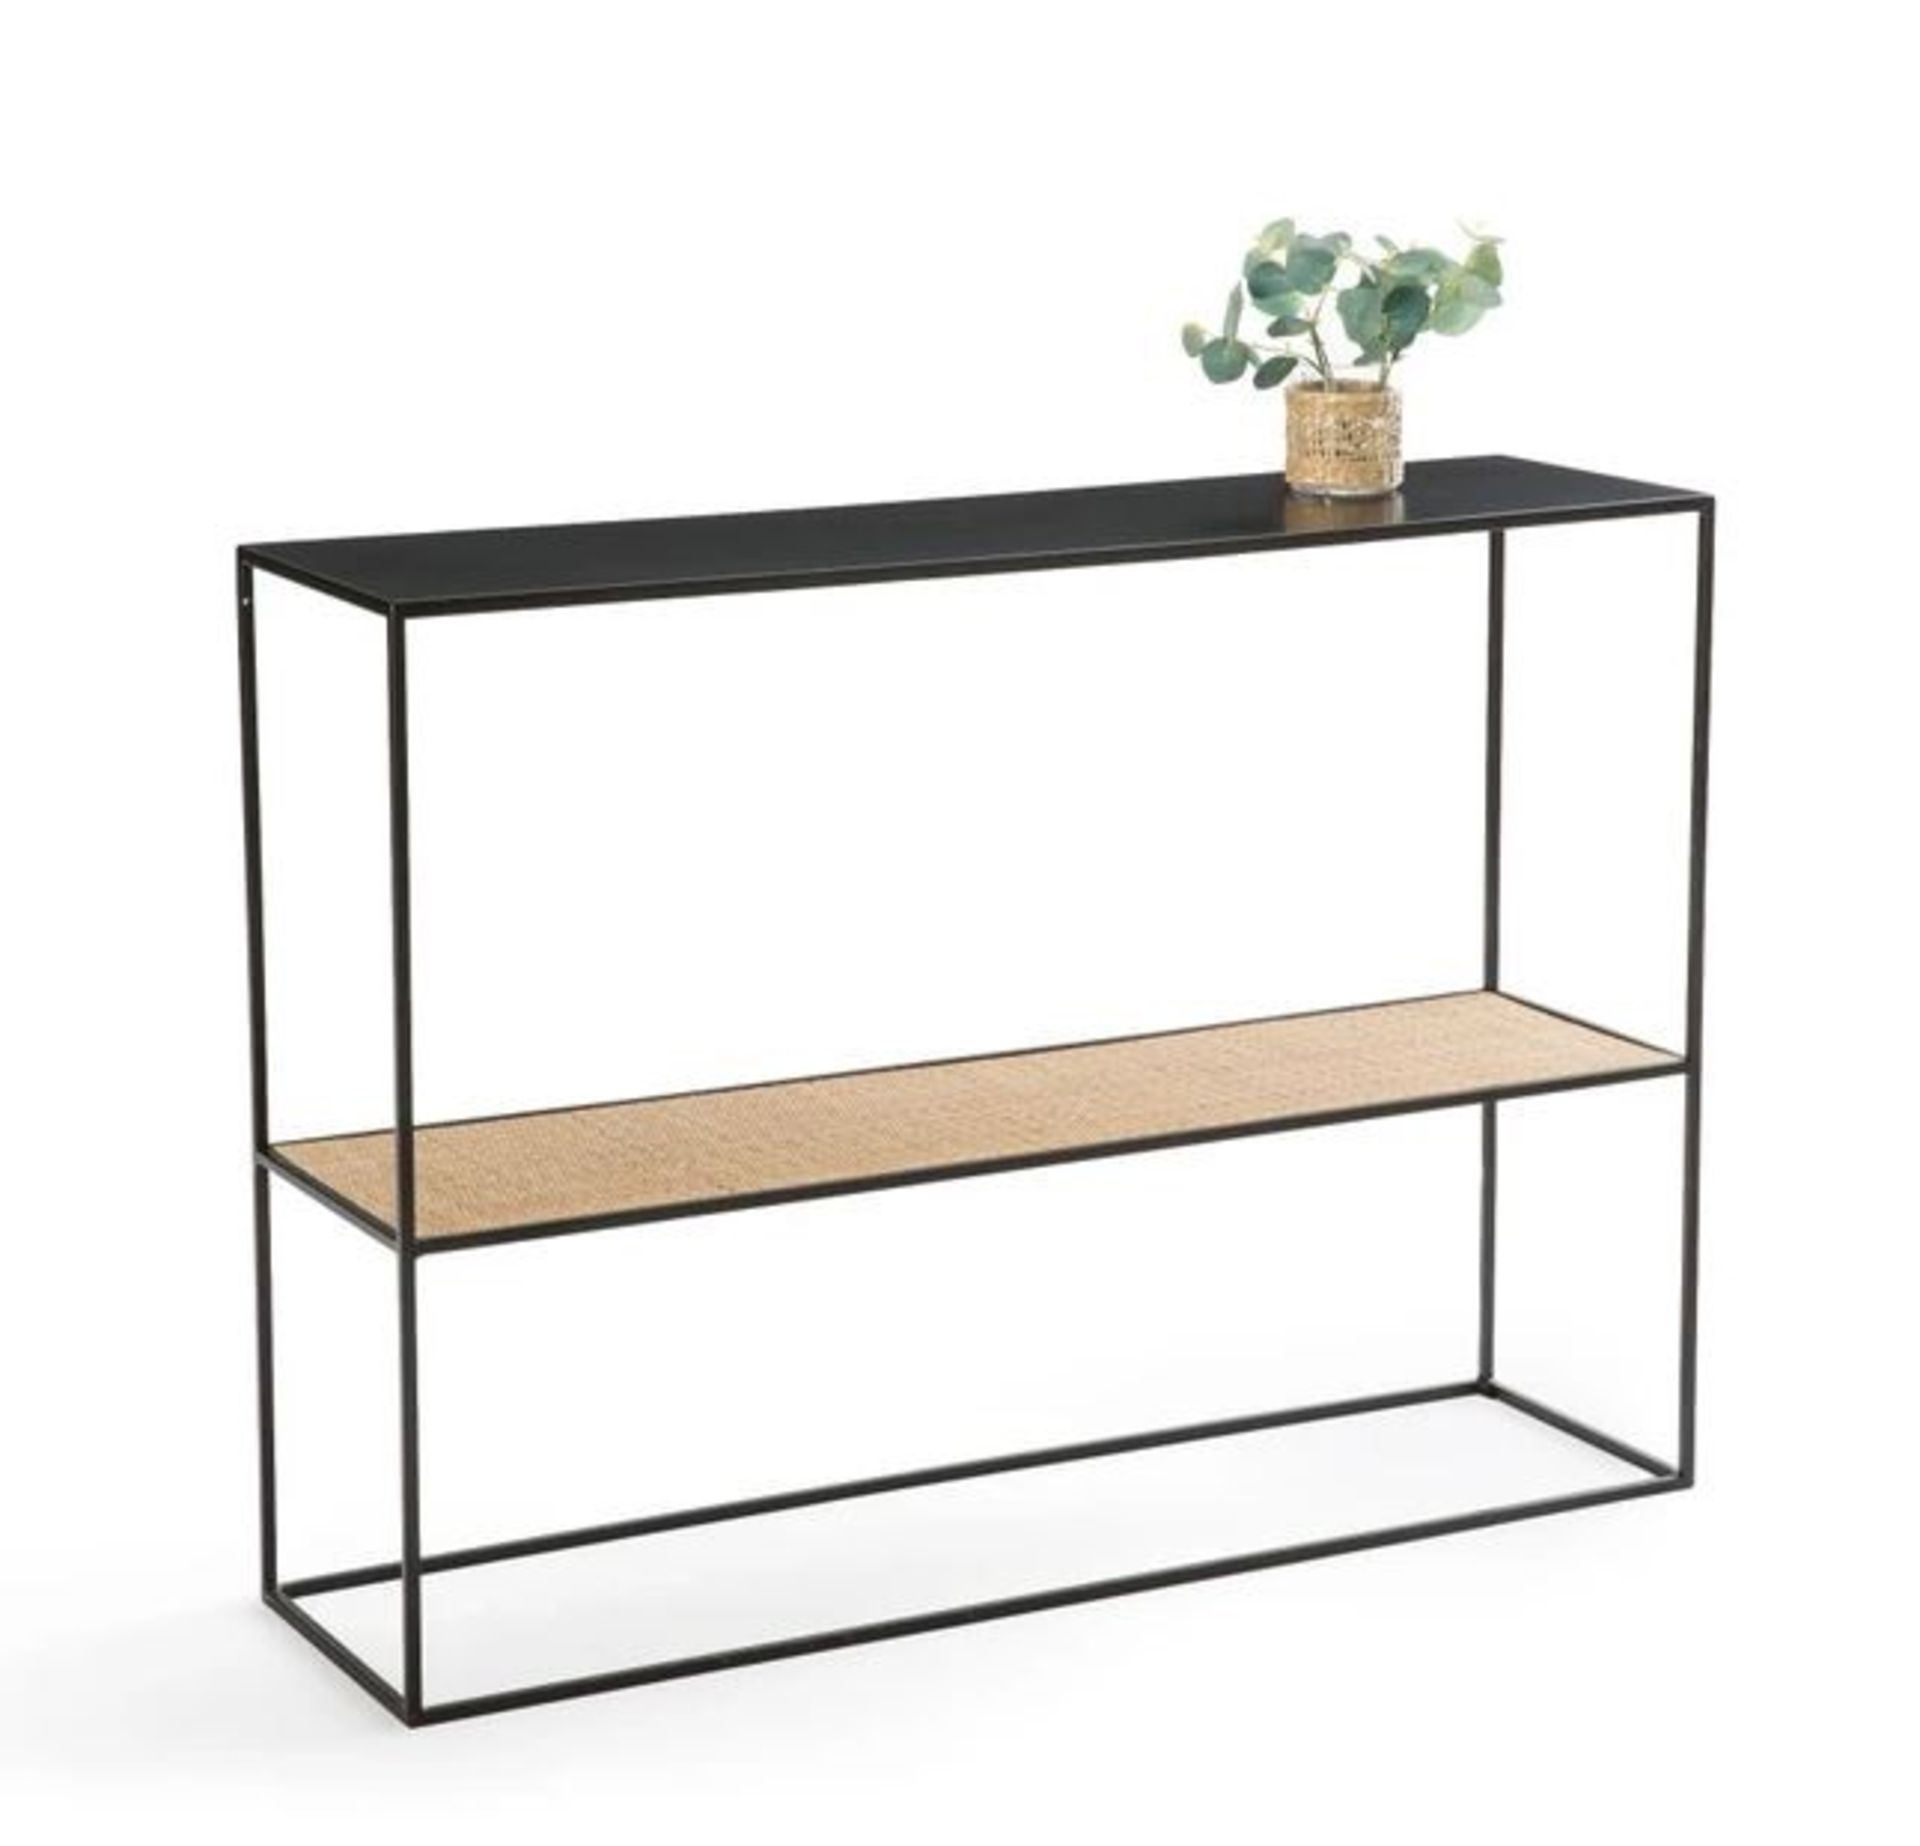 LA REDOUTE ROSALI CONSOLE IN METAL AND CANE